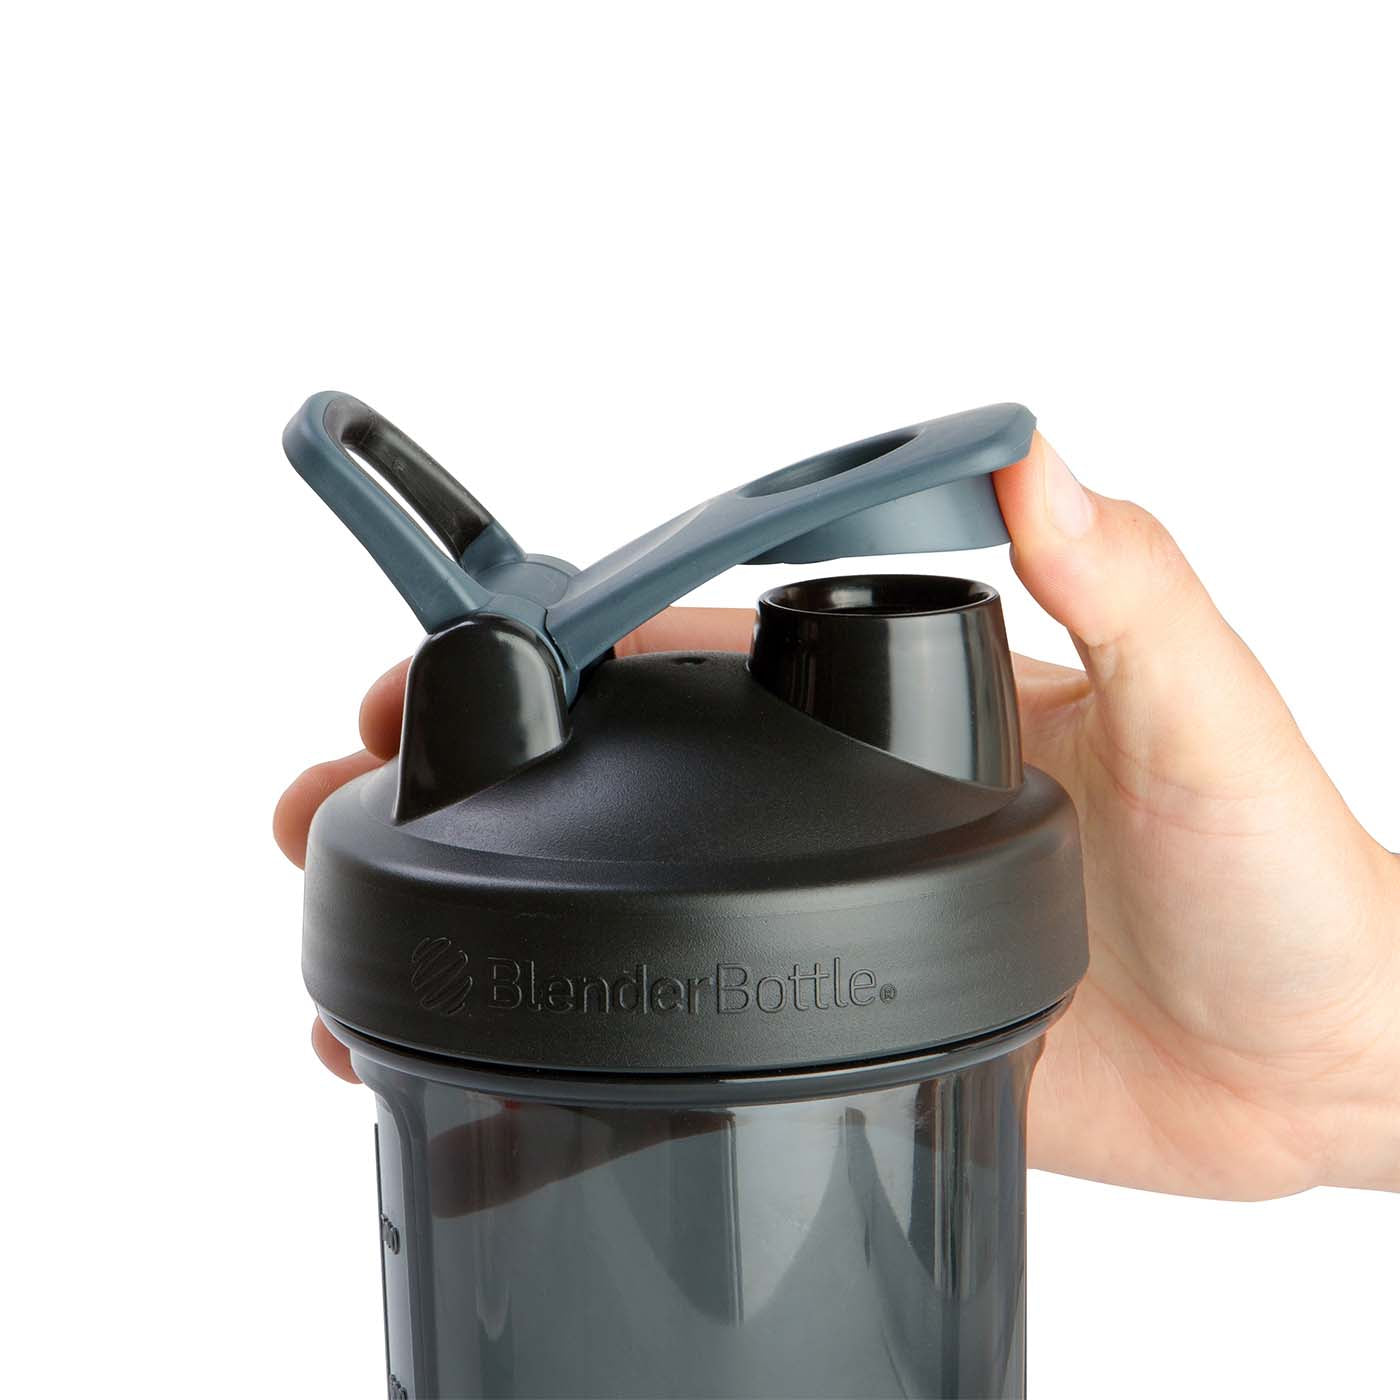 Hand holding a BlenderBottle with a SpoutGuard cap, which snaps closed to keep the drinking spout clean.